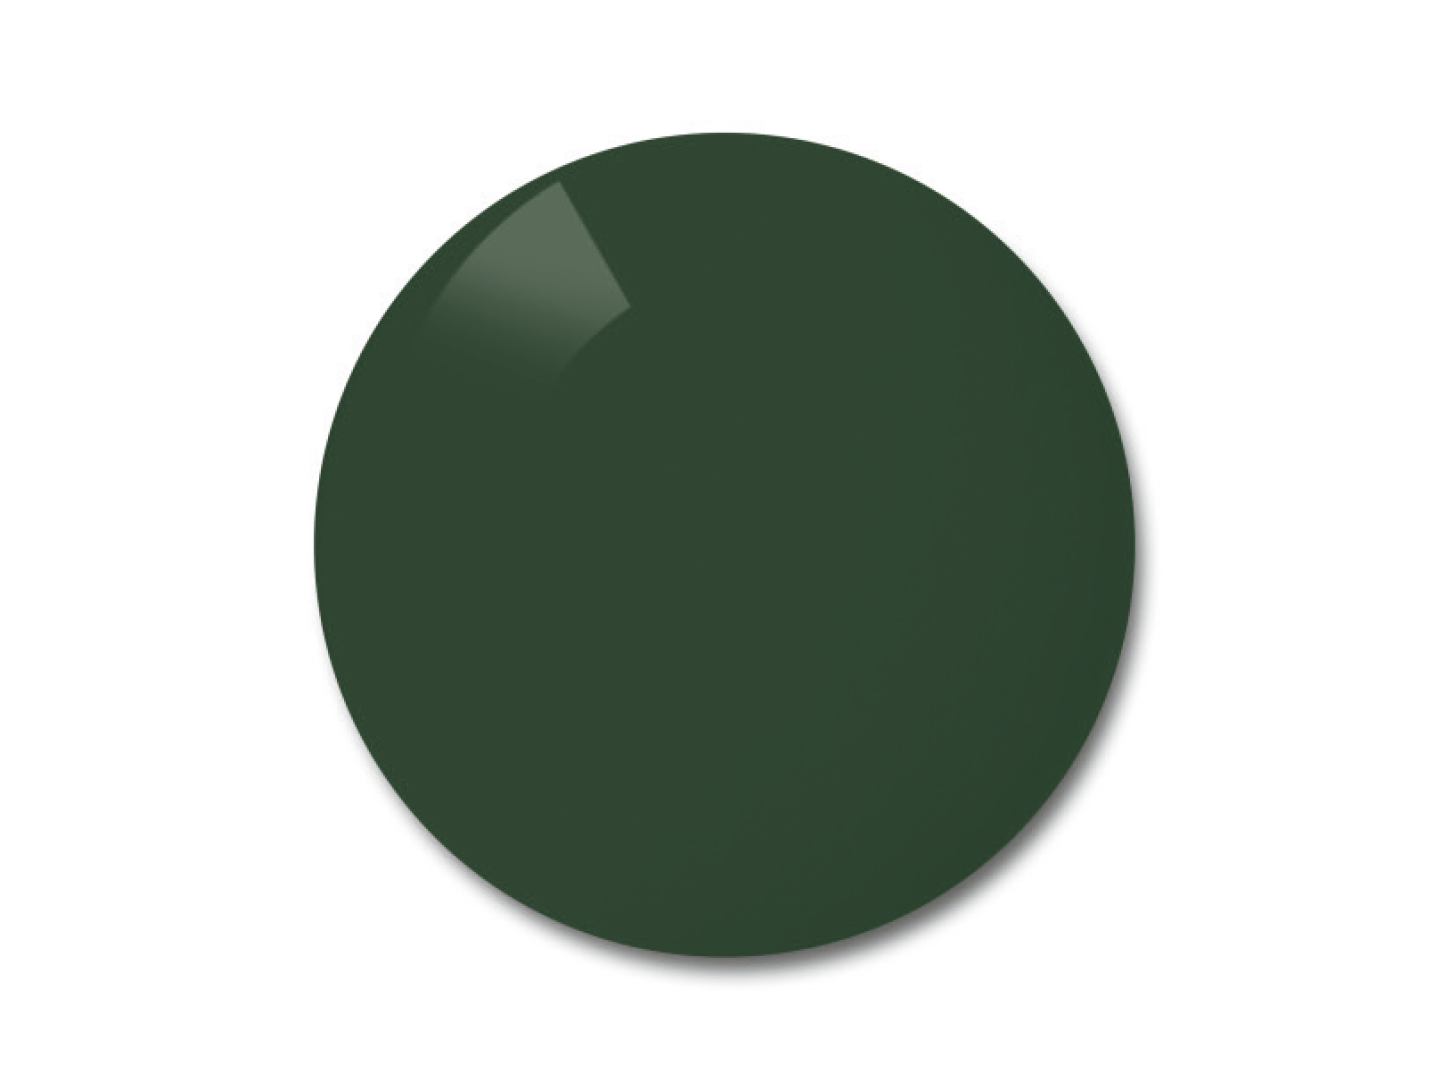 Illustration of ZEISS Polarized Lens in the color option pioneer (grey-green lens tint) 